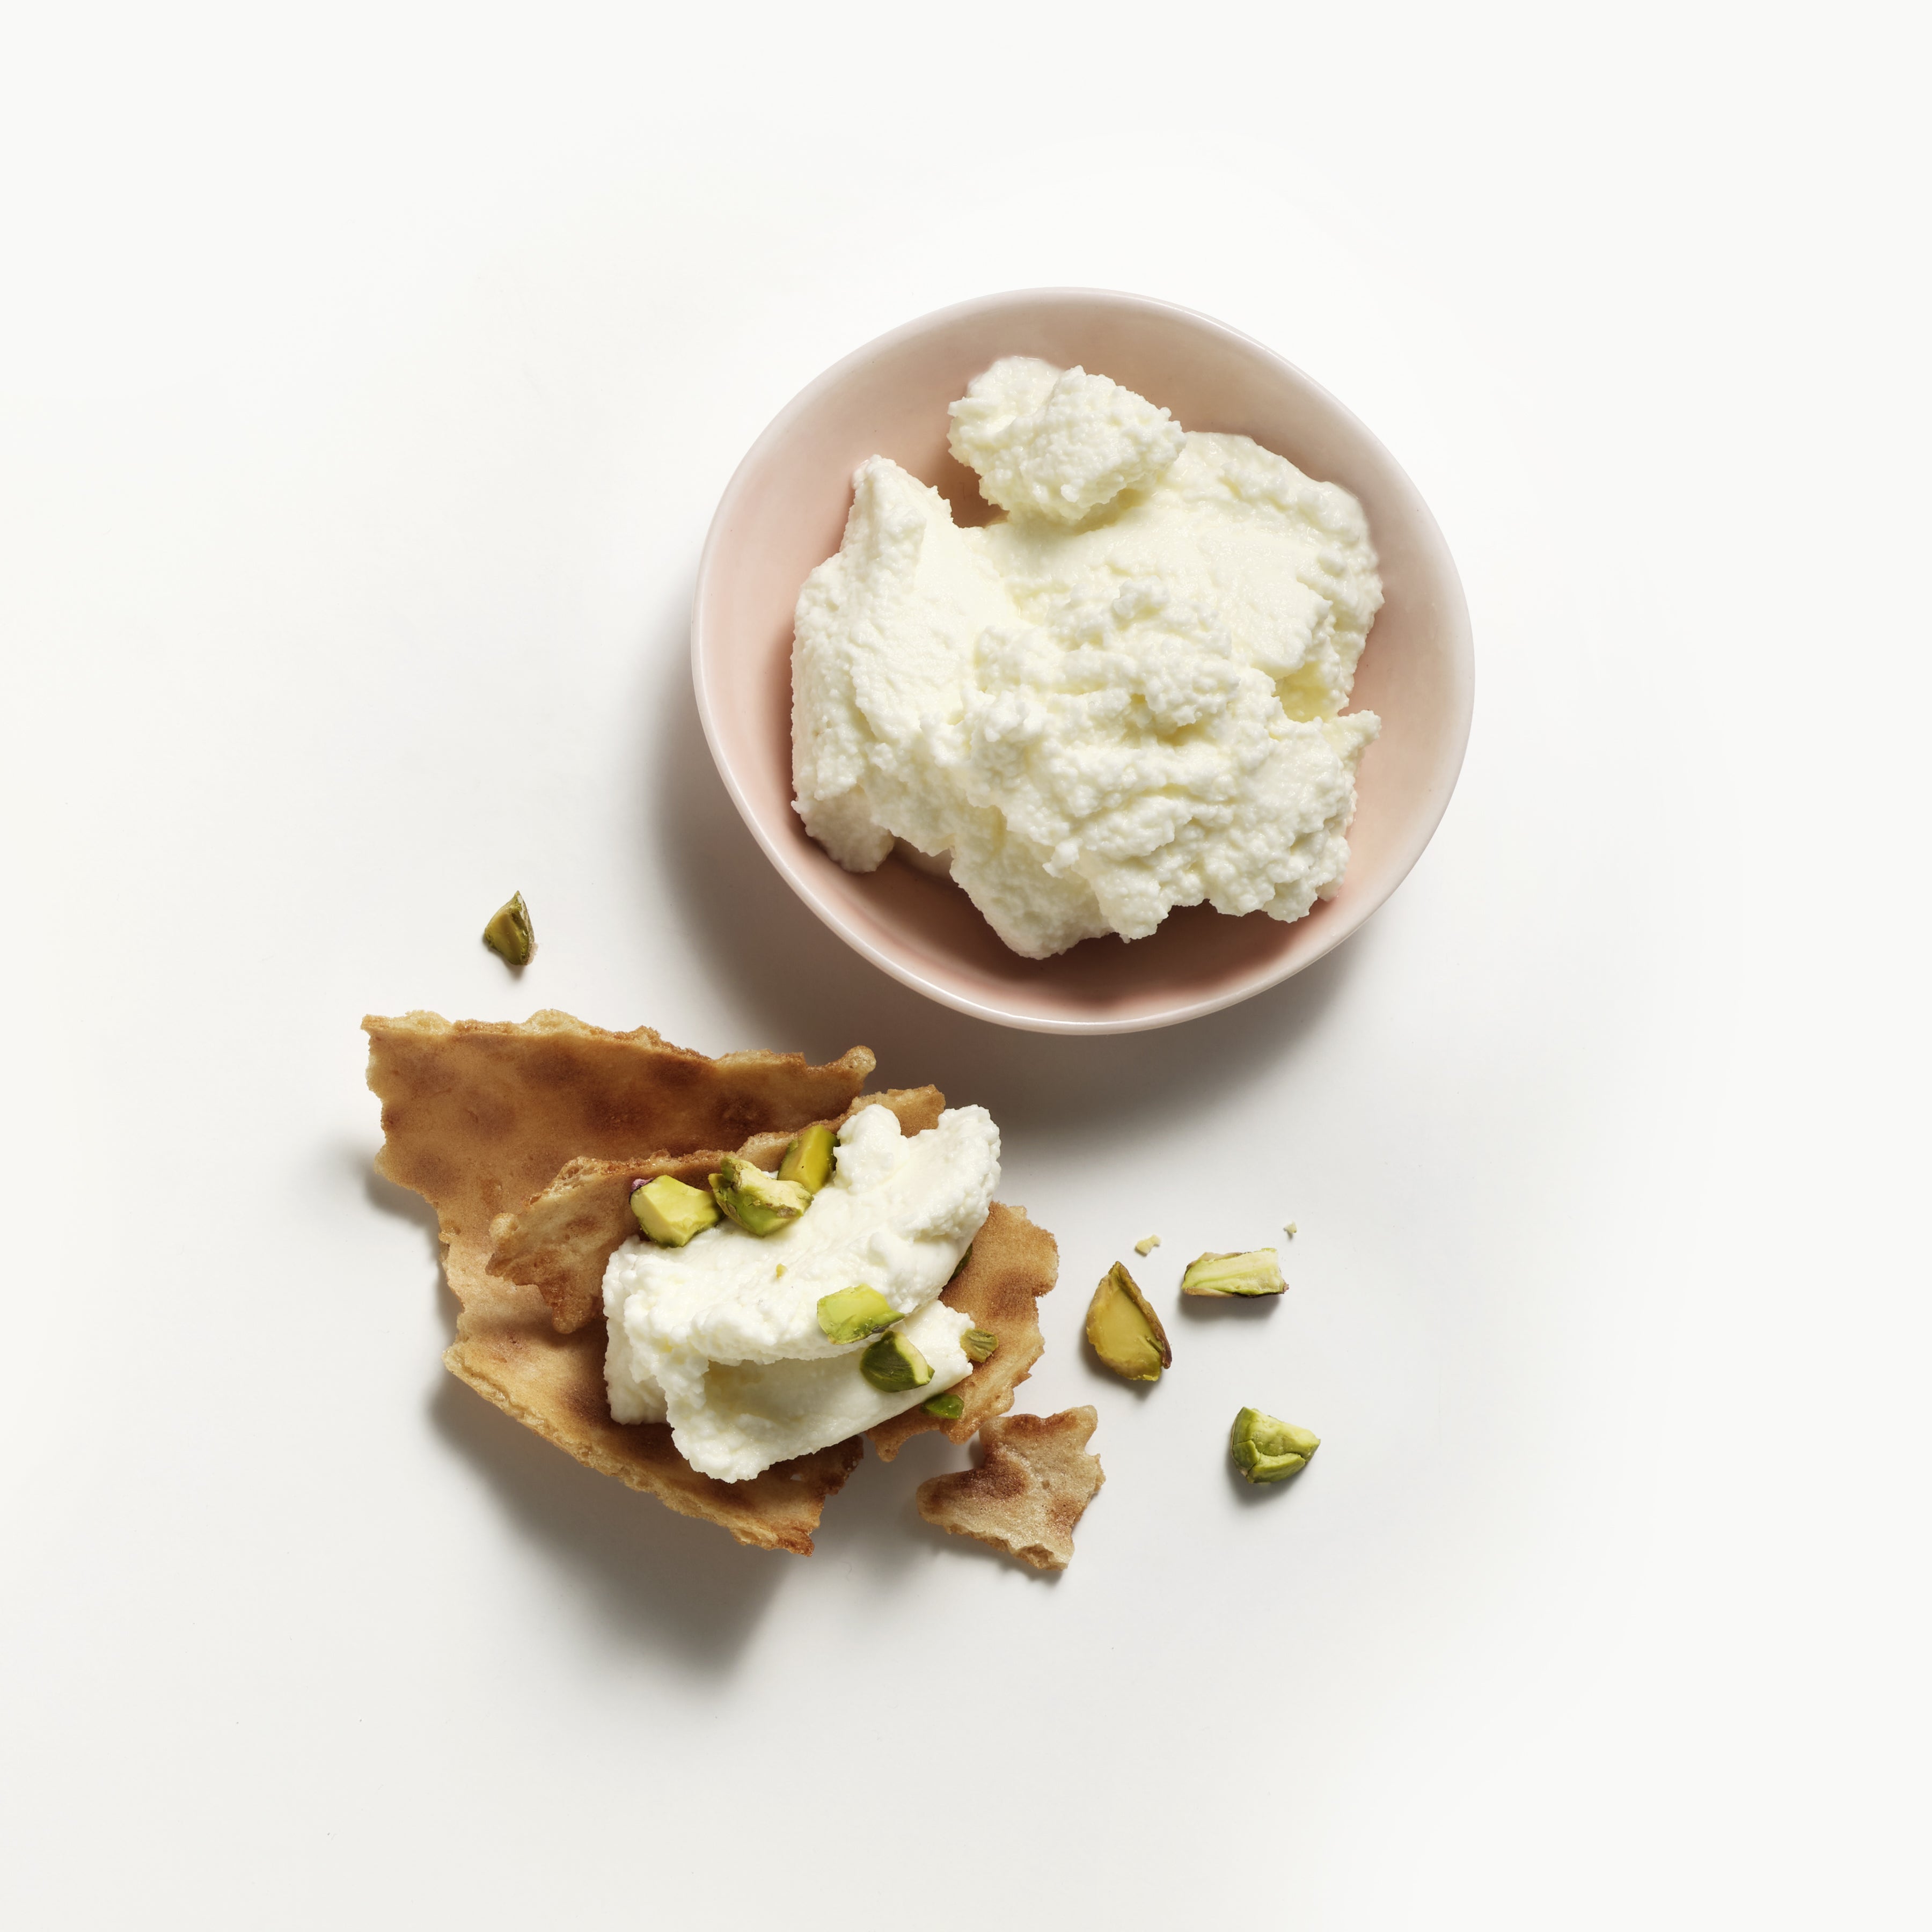 Saputo Ricotta Fiorella with crumbled crushed pistachios on a sweet cracker